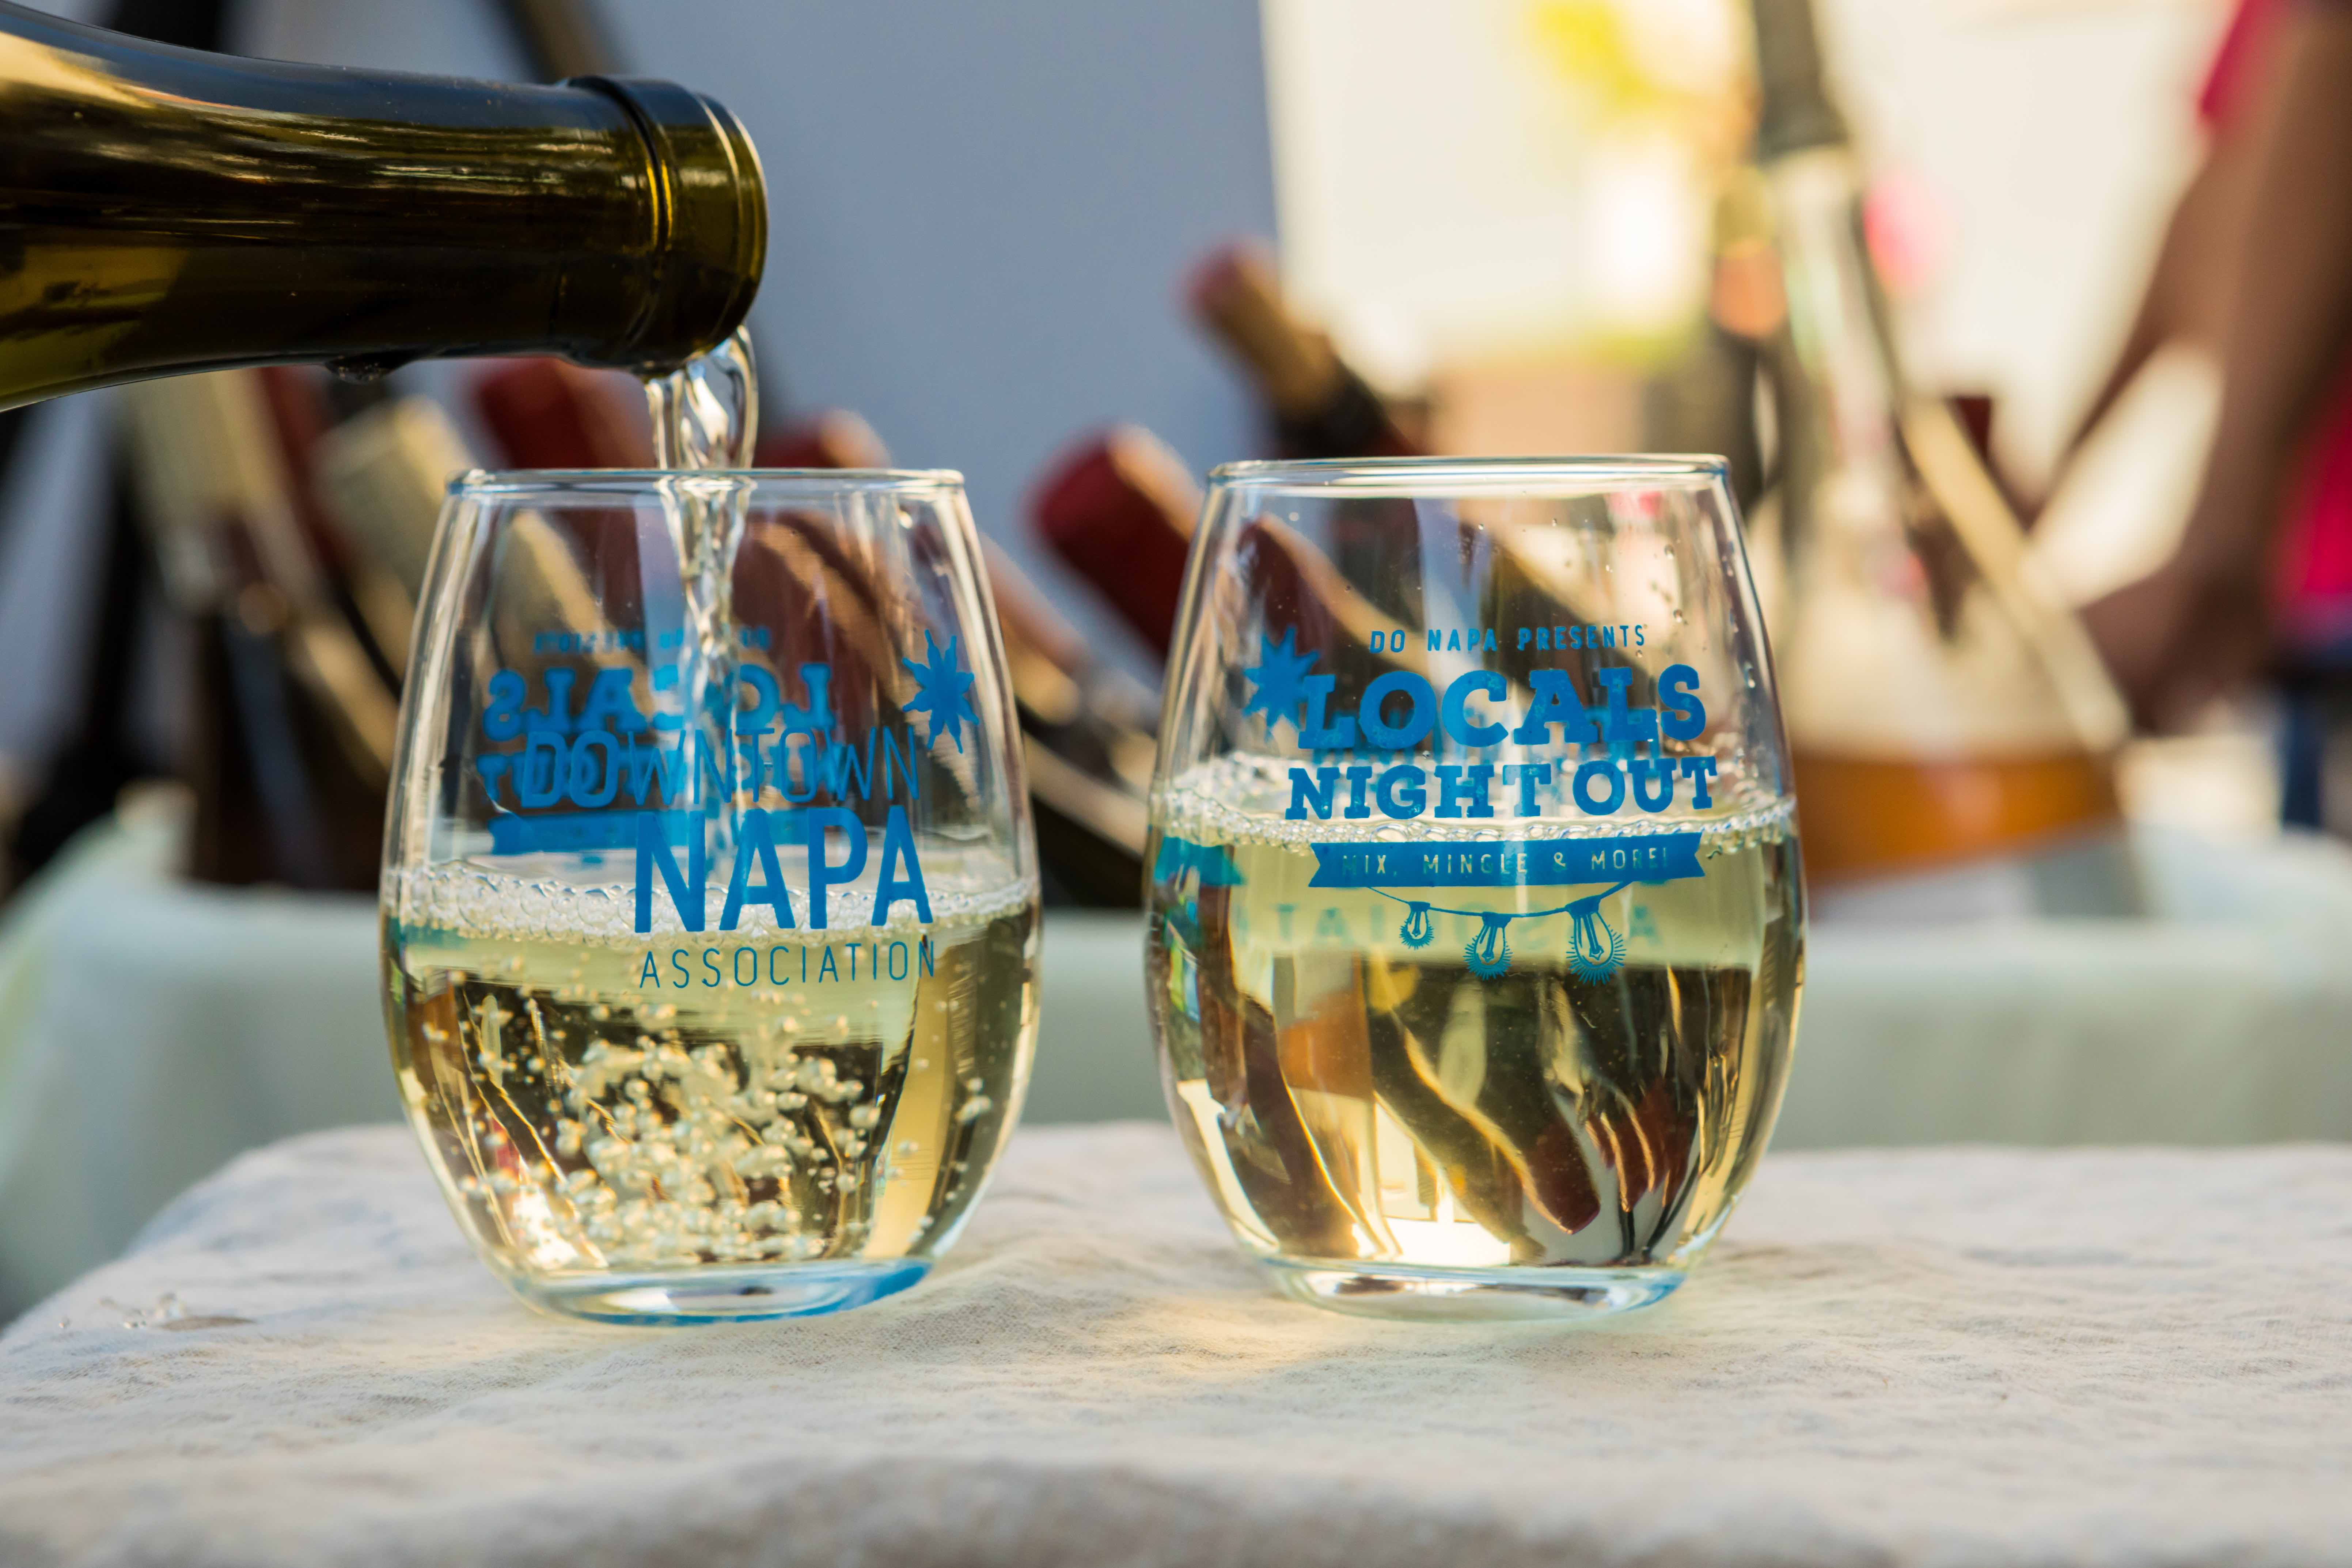 Family-friendly activities, food and wine, artisan-made wares and mixology contest offer something for everyone during final Locals Night Out of 2019.